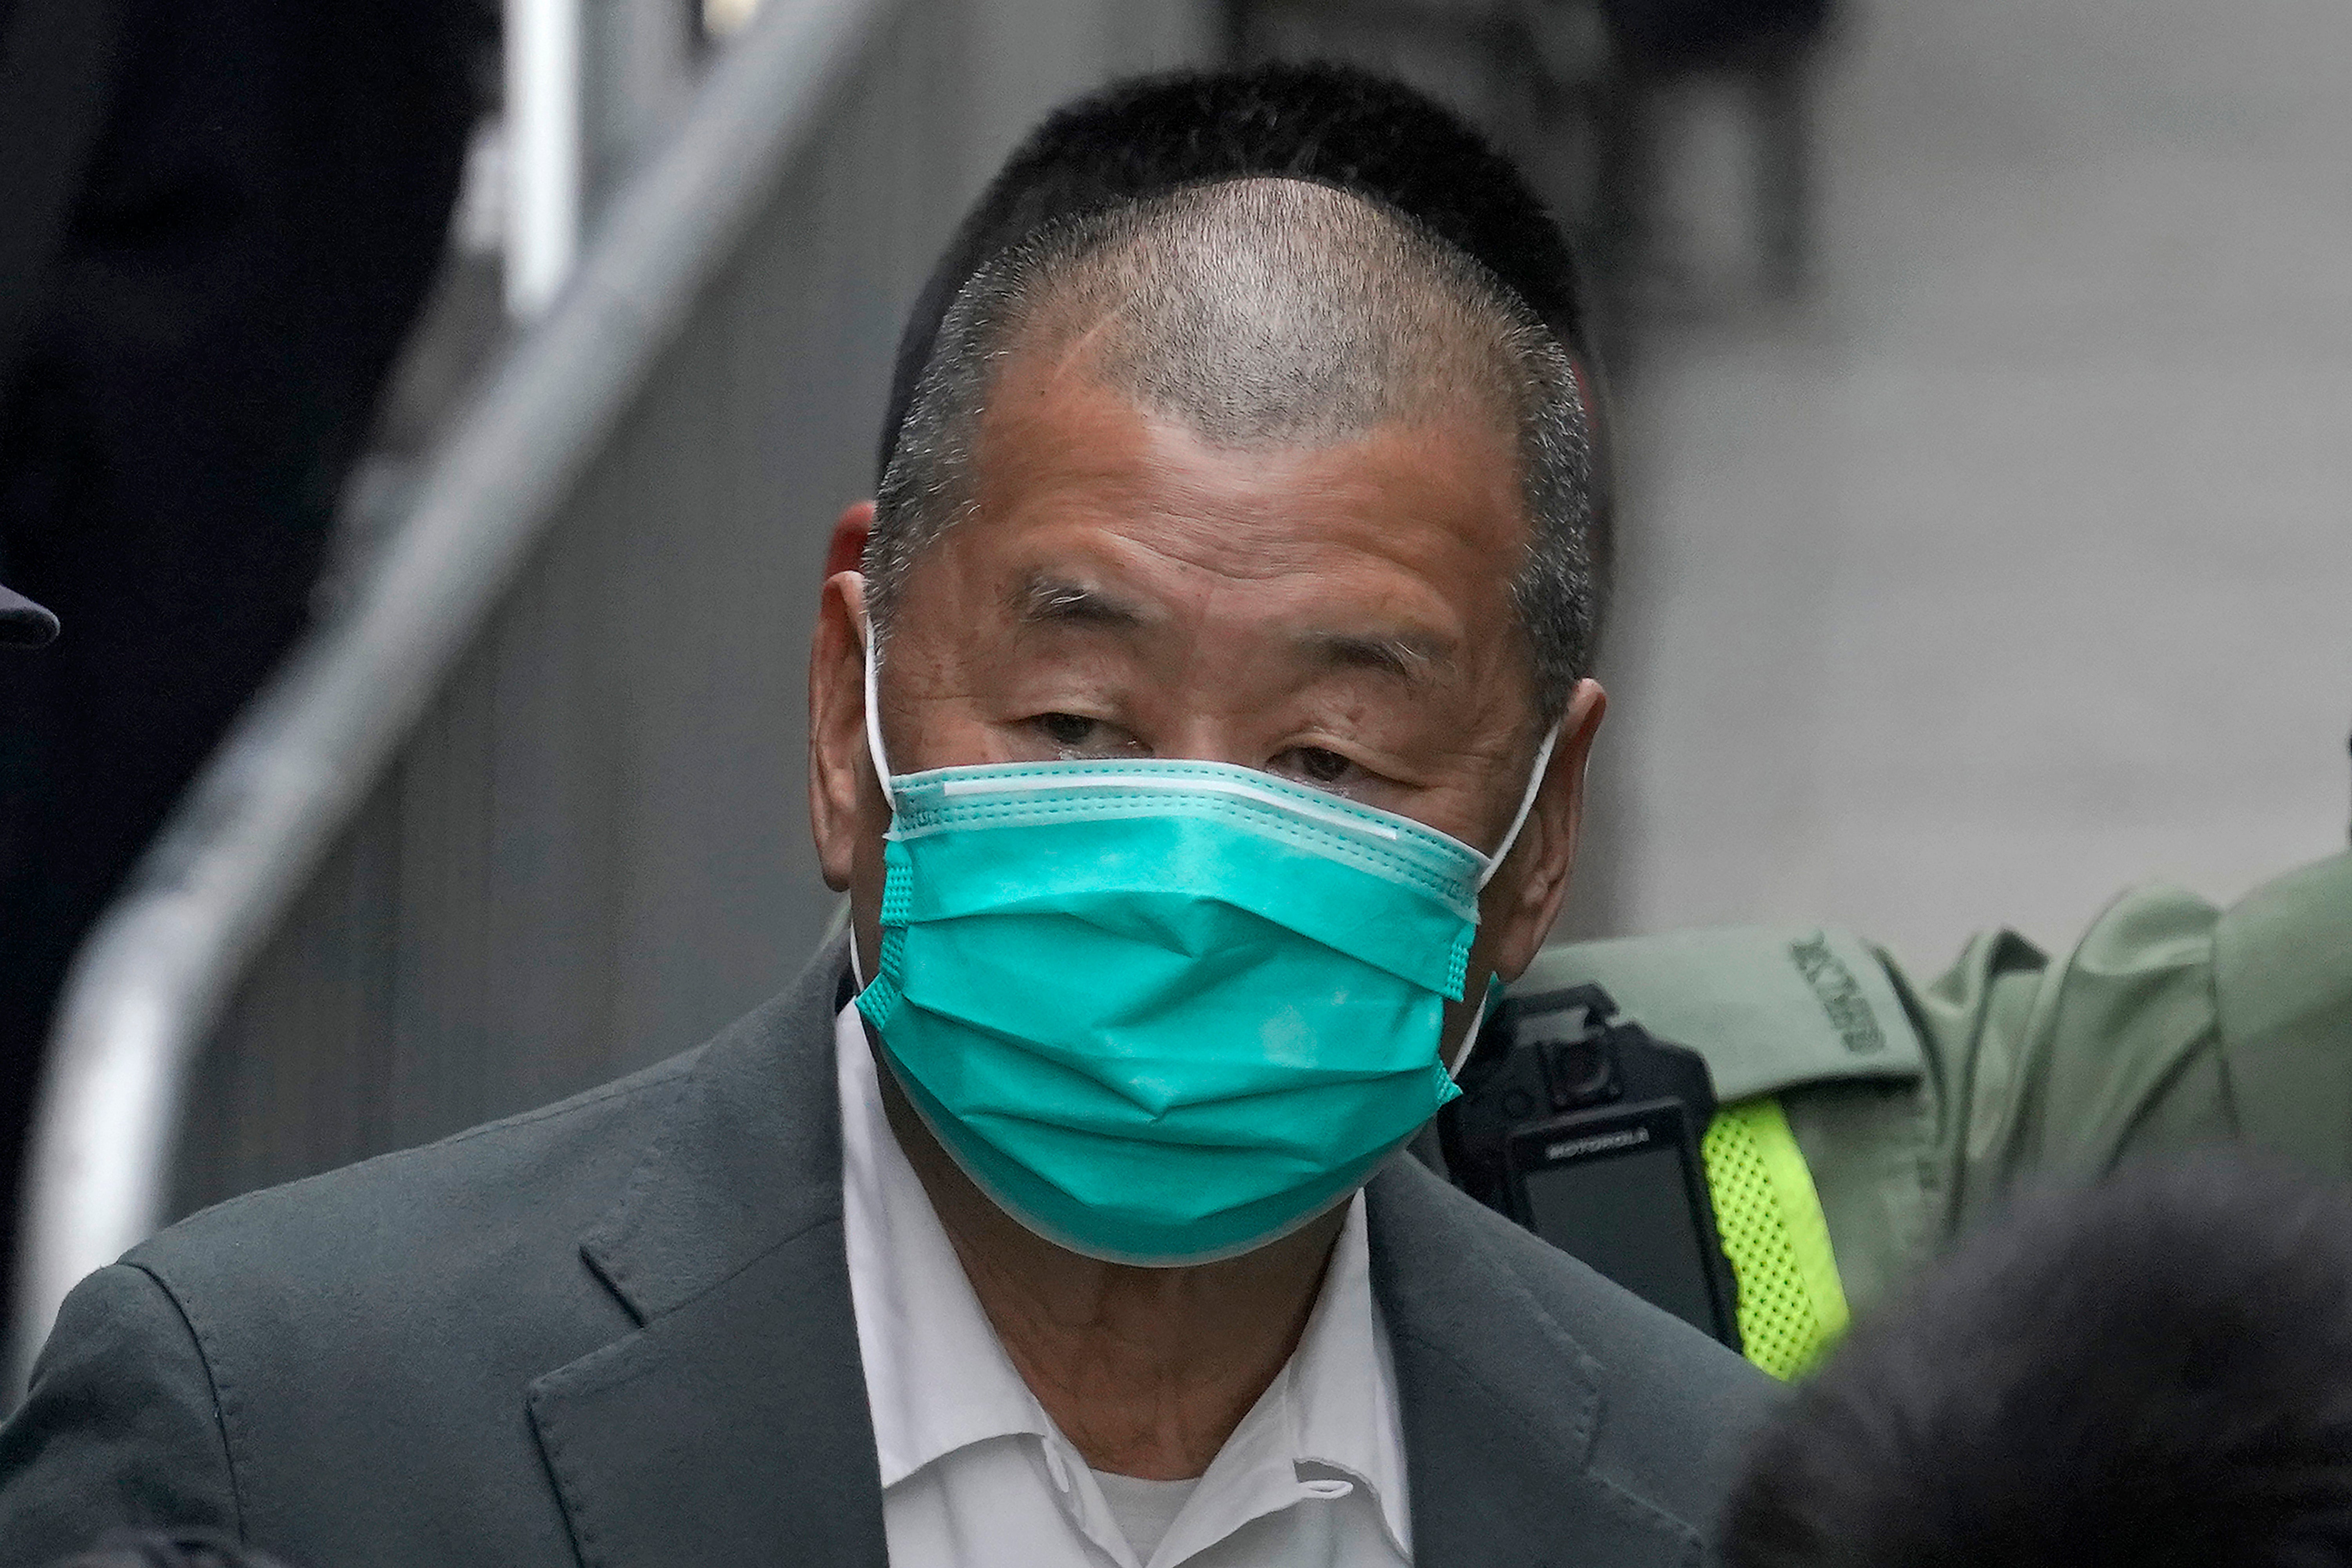 File: Jimmy Lai leaves the Hong Kong's Court of Final Appeal in Hong Kong, on 9 February 2021